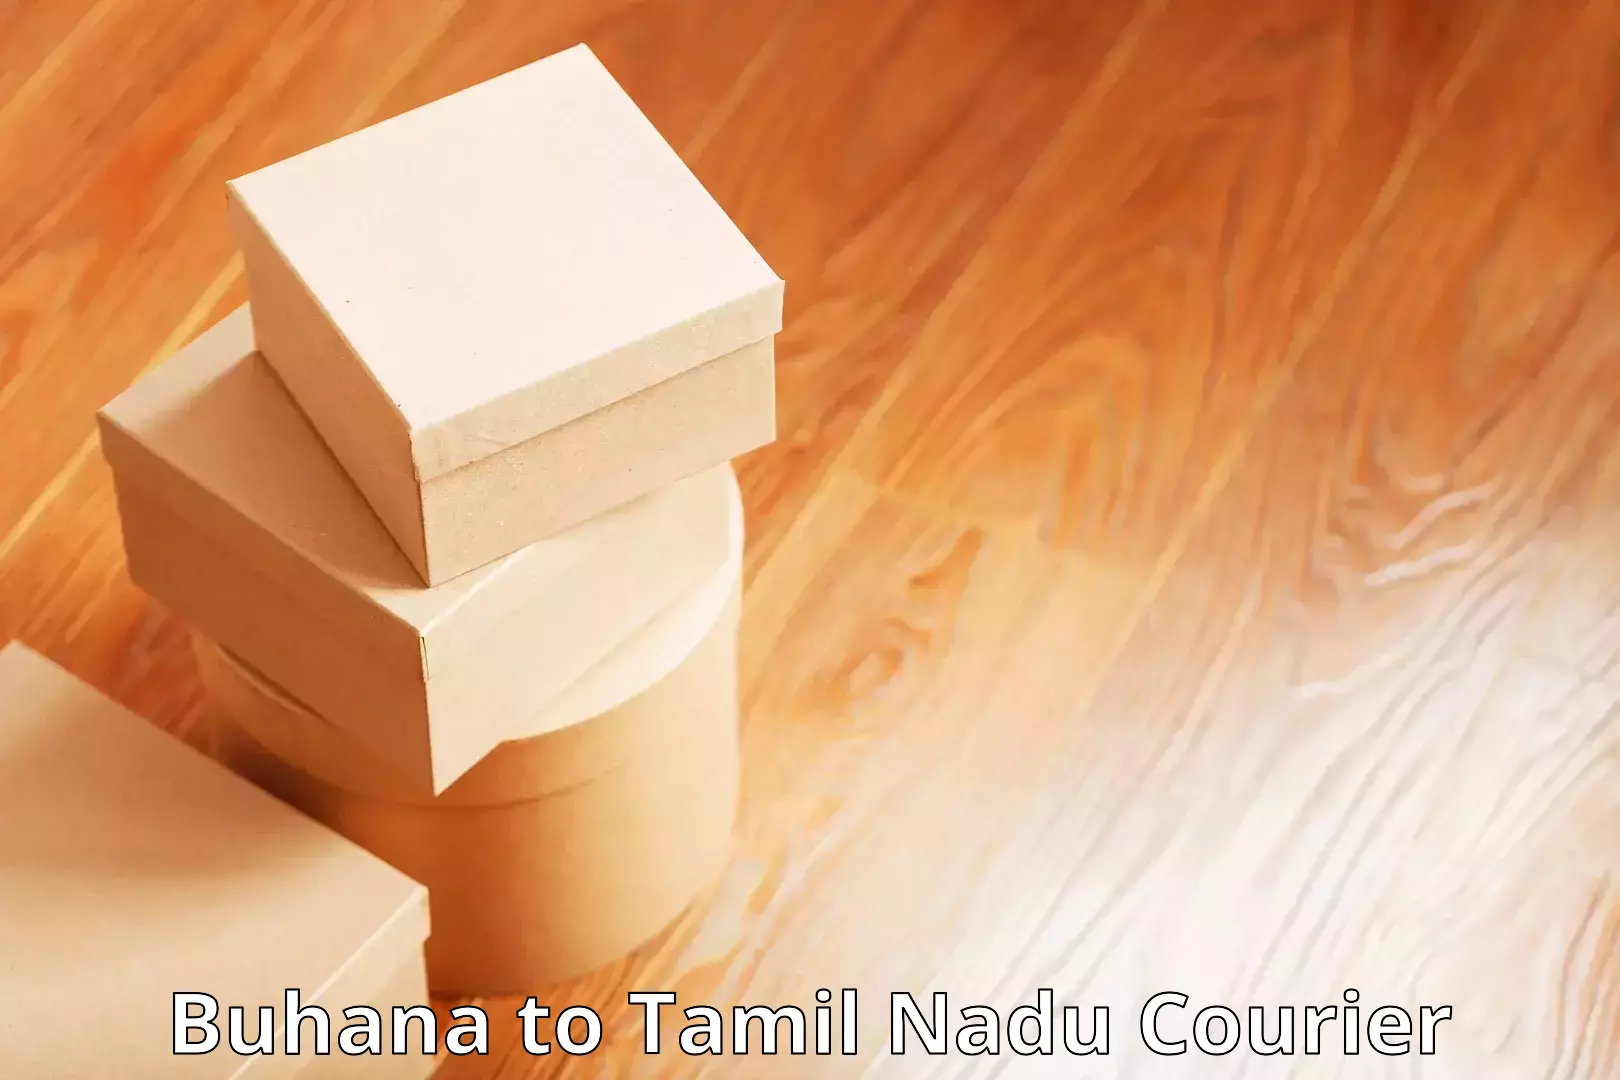 Round-the-clock parcel delivery Buhana to Tuticorin Port